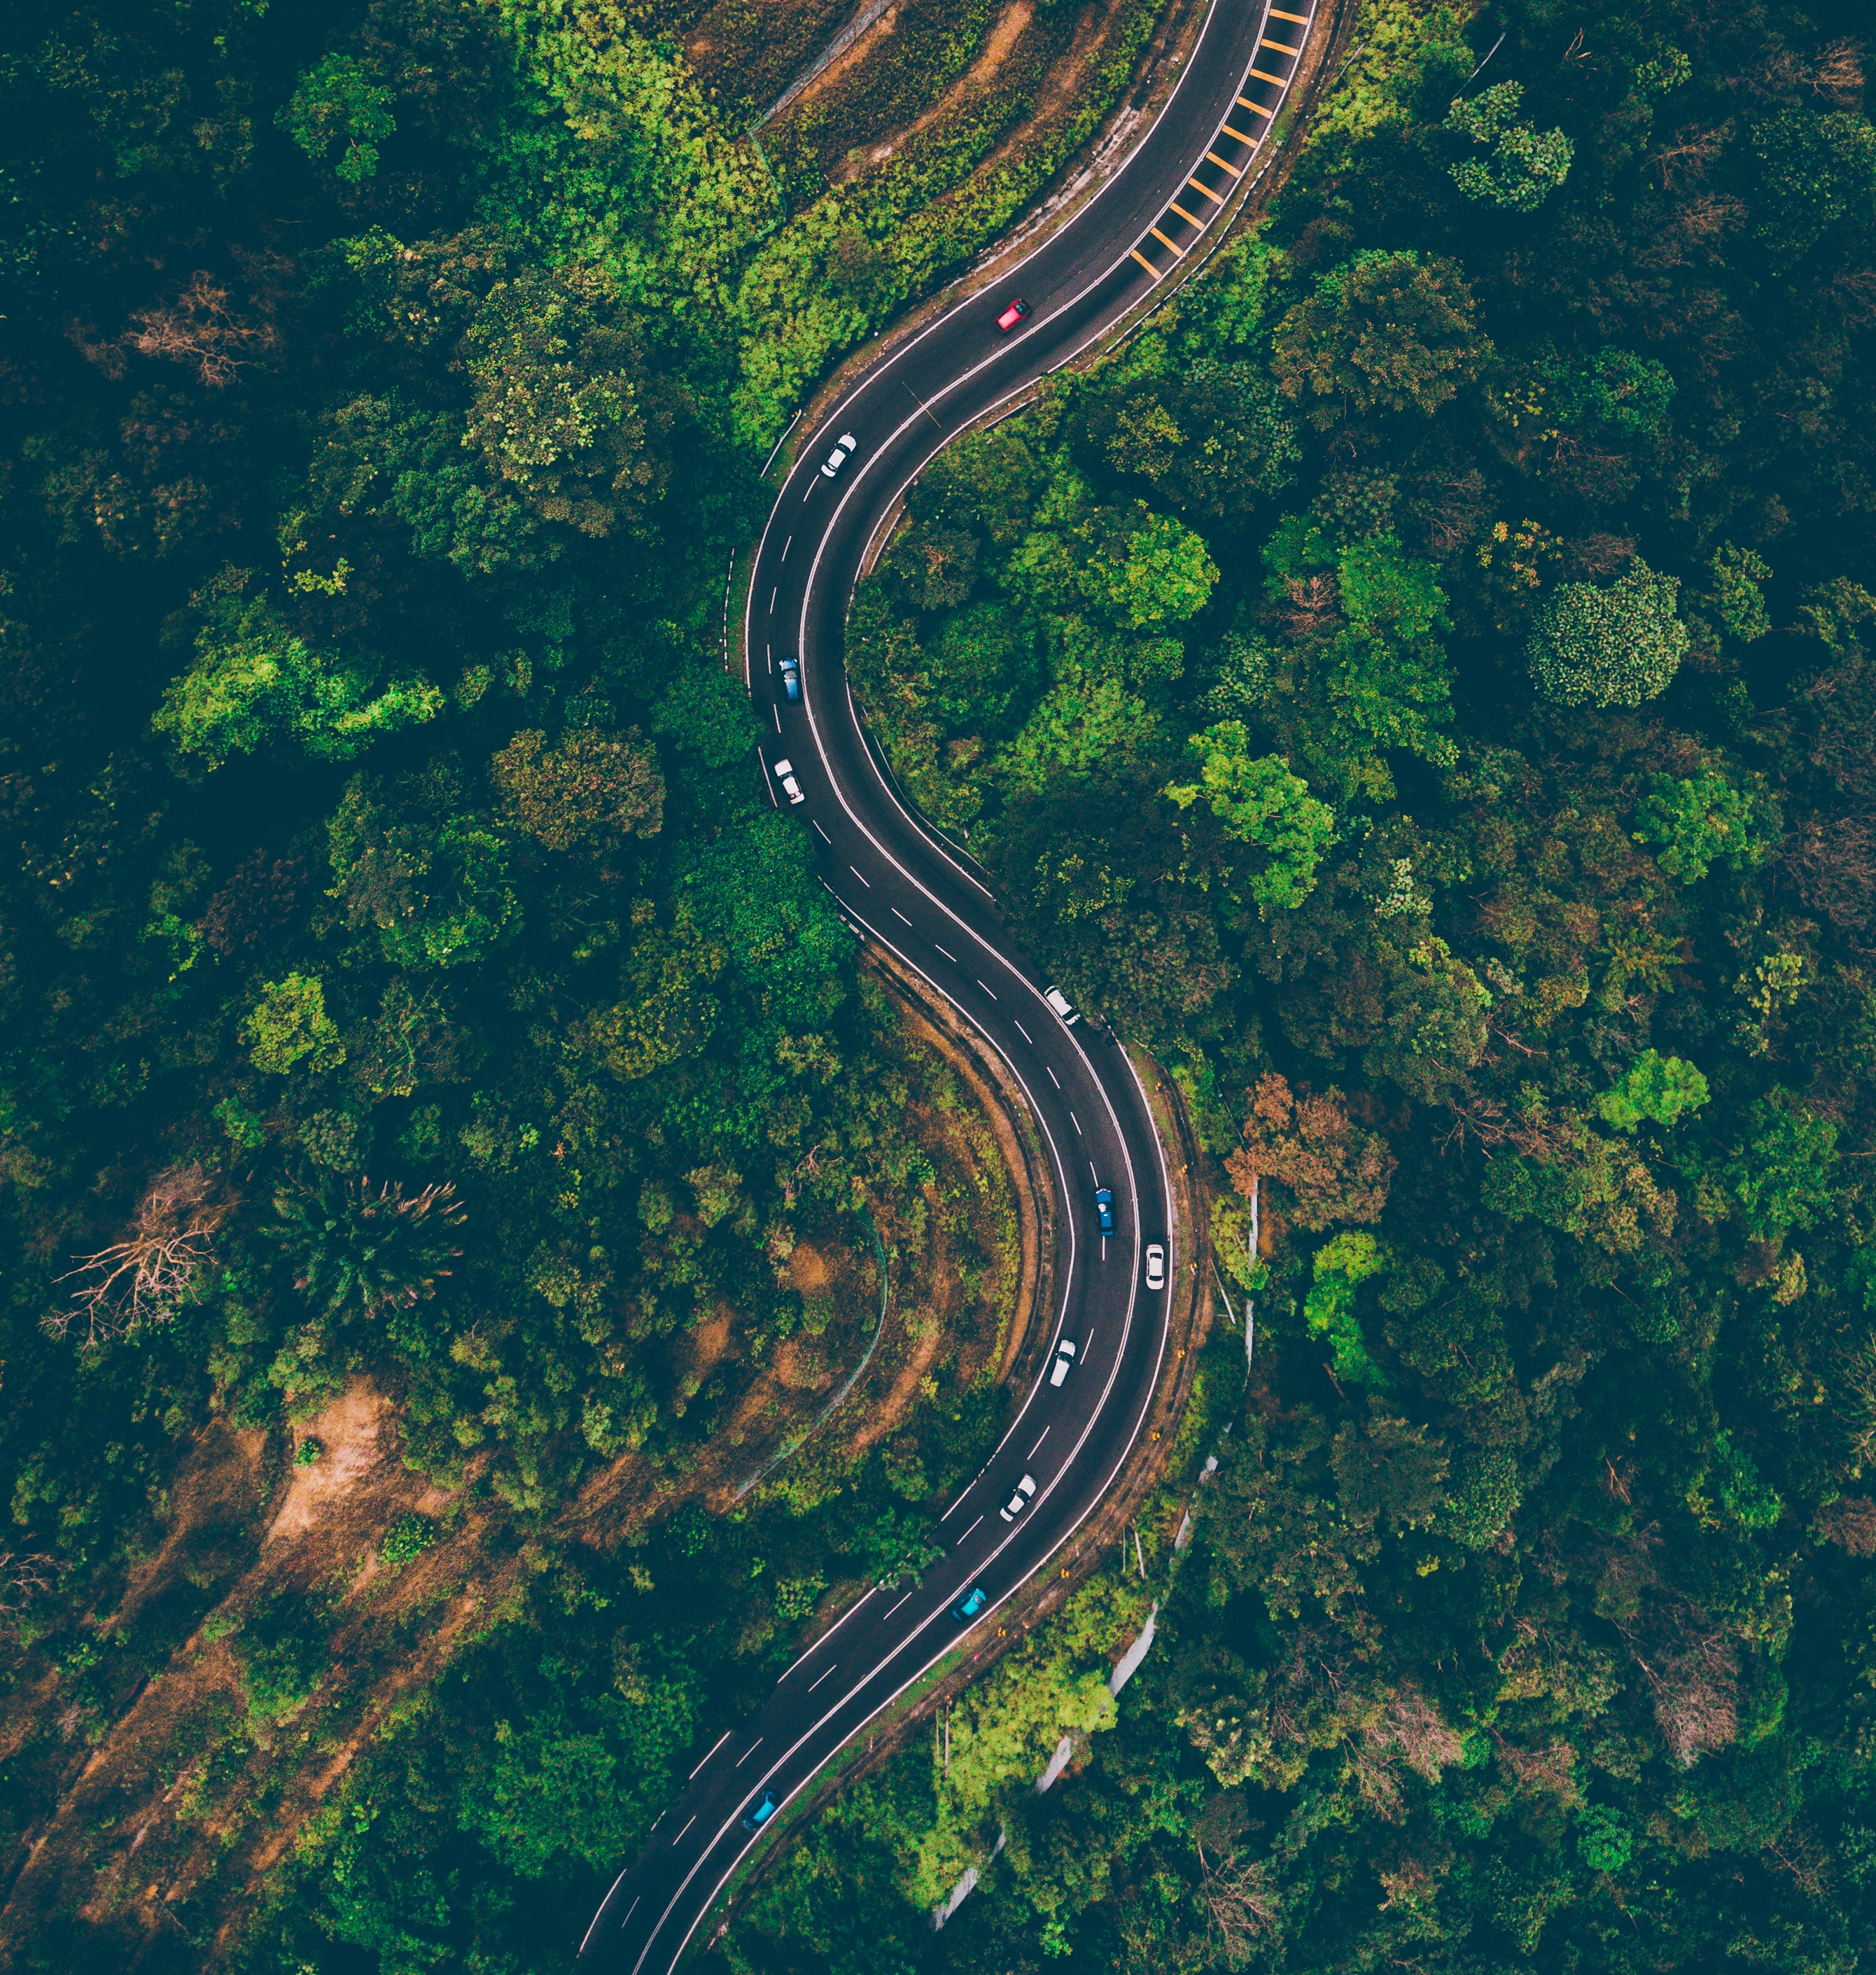 road, view from above, sinuous, nature, trees, winding, malaysia, batang kali